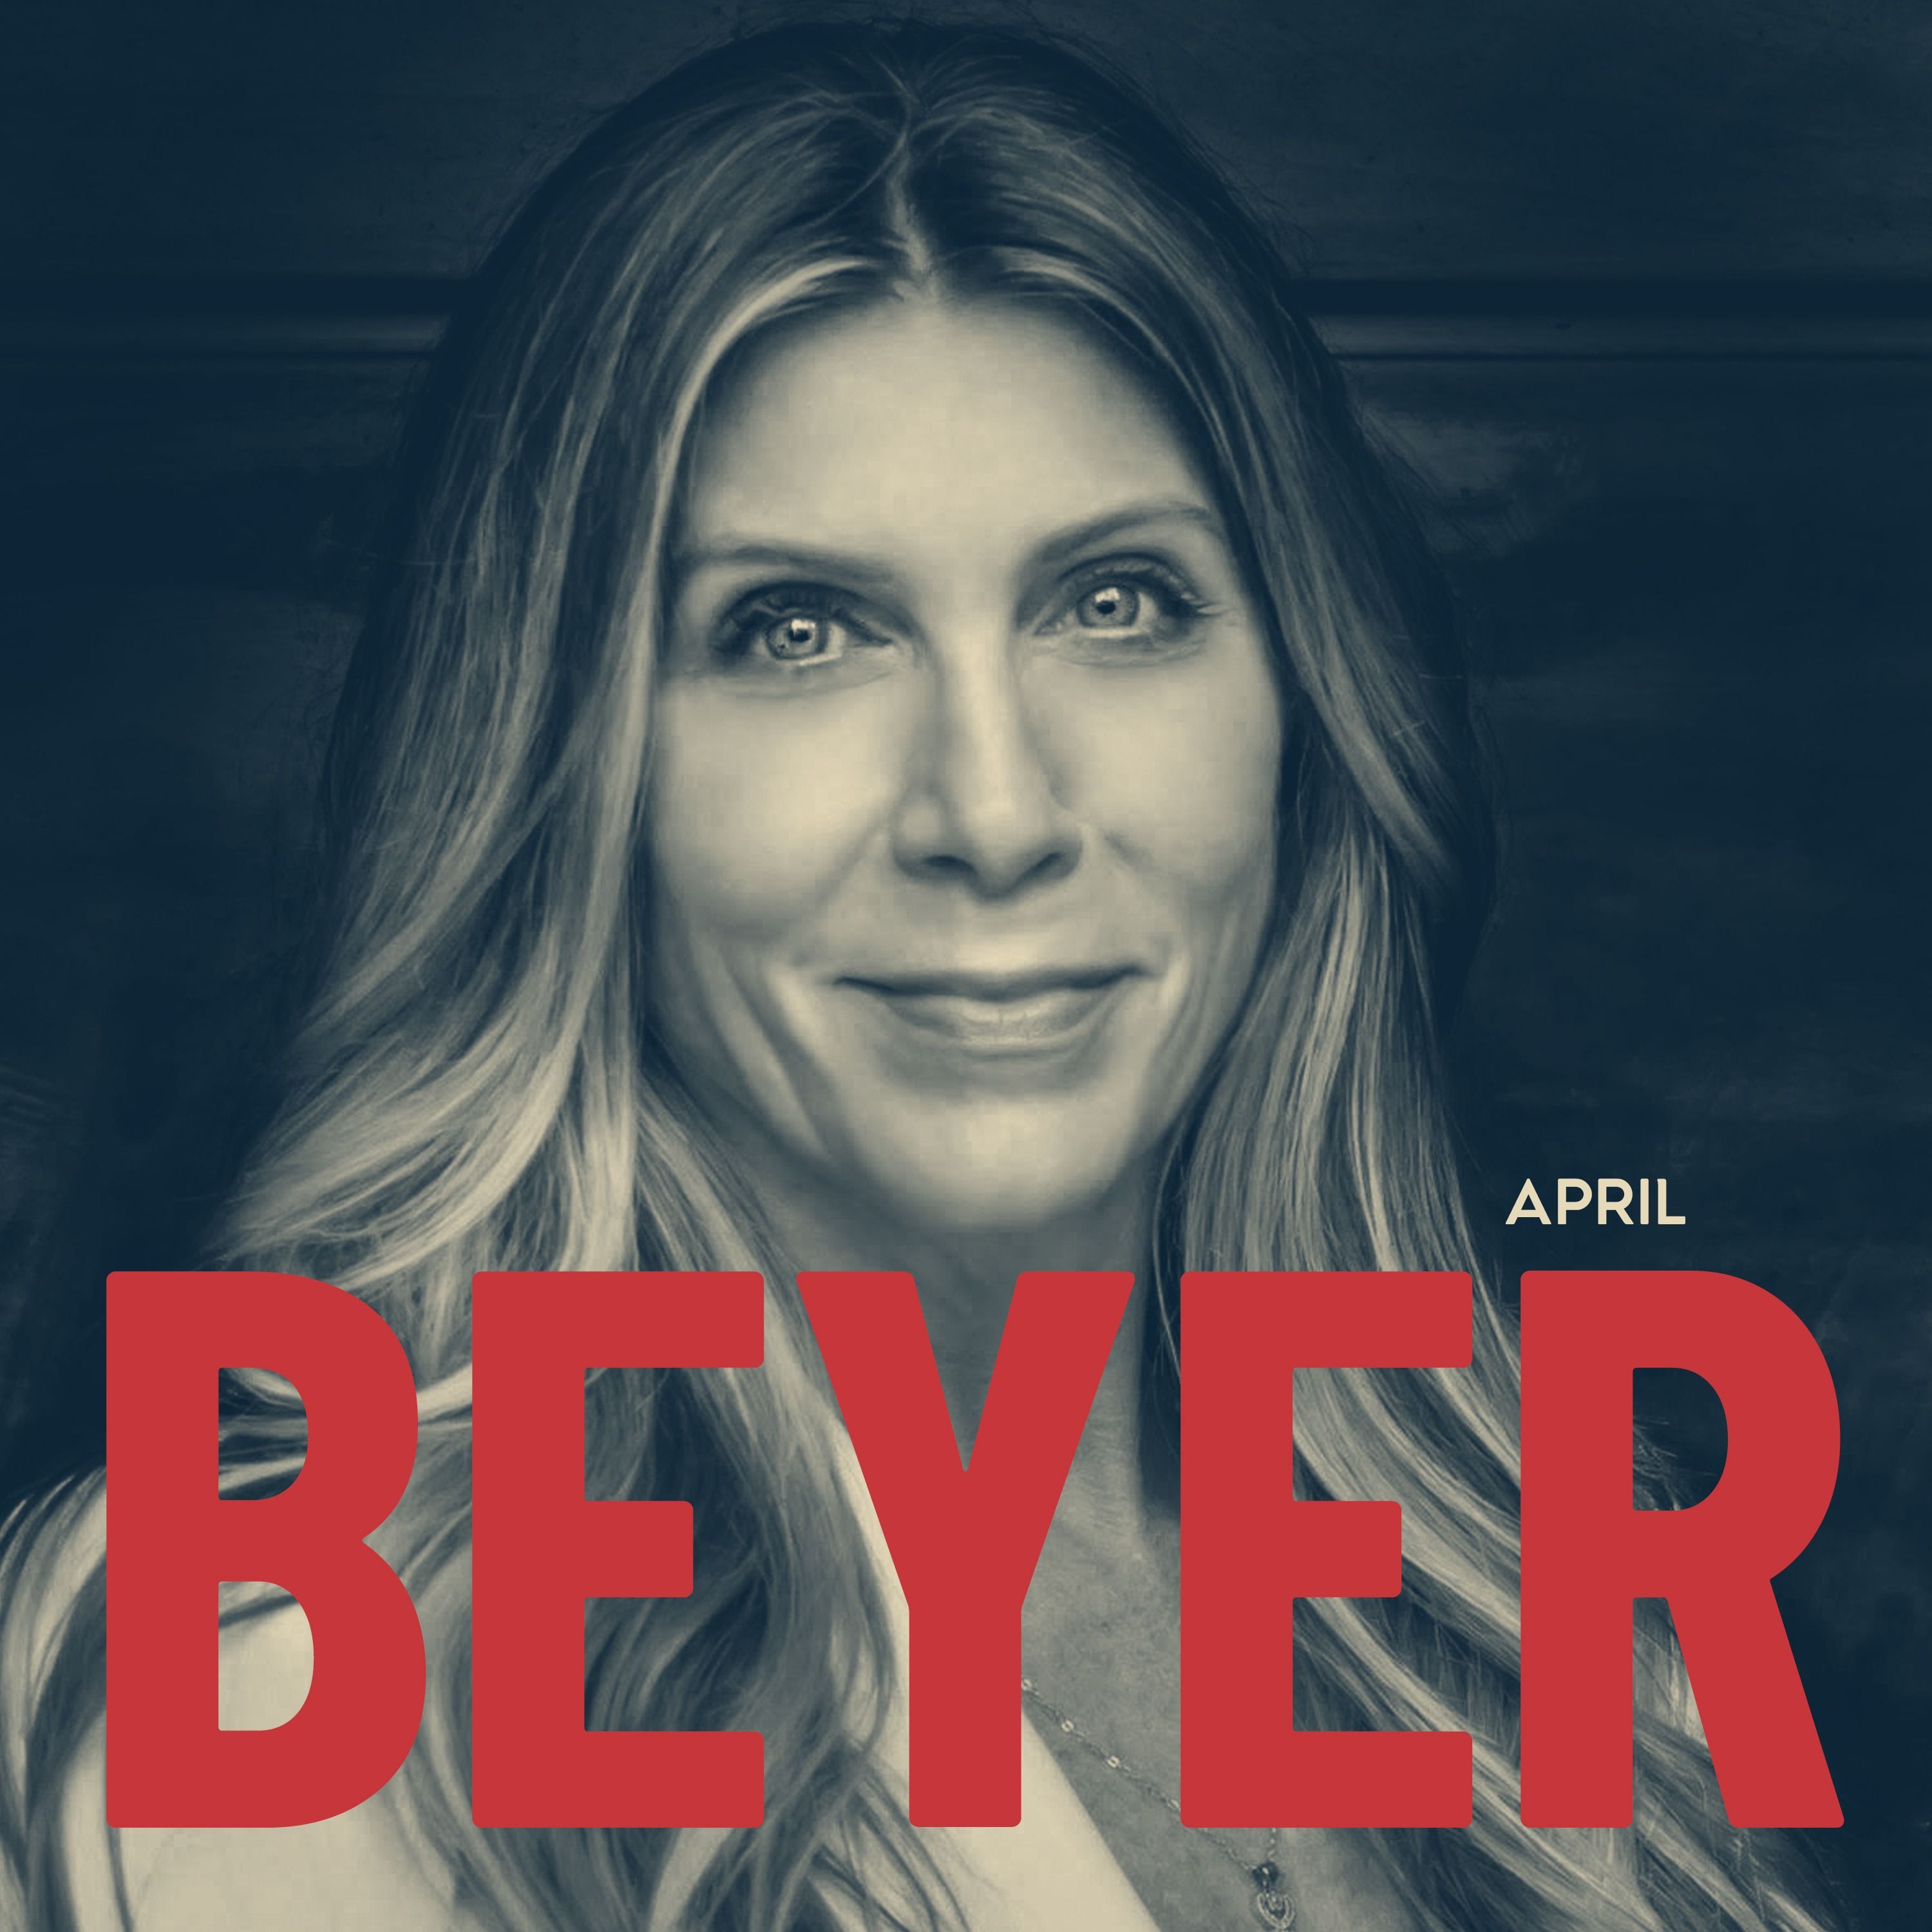 Qualified with April Beyer Episode 2